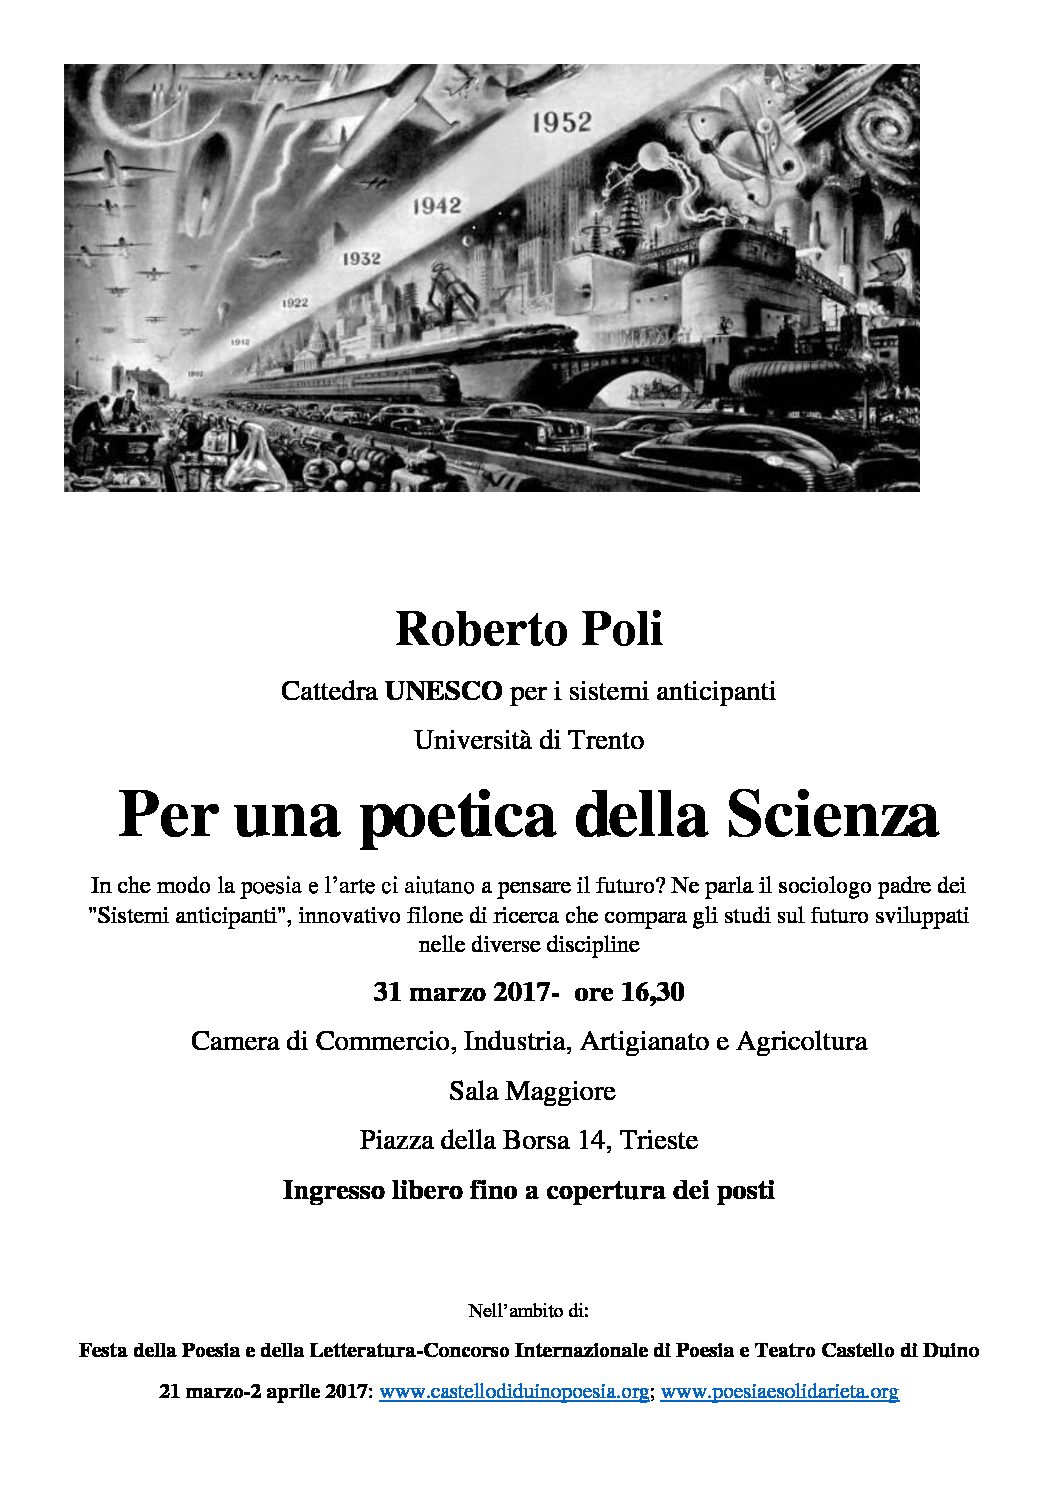 Lecture by prof. Roberto Poli UNESCO chair for anticipatory Systems